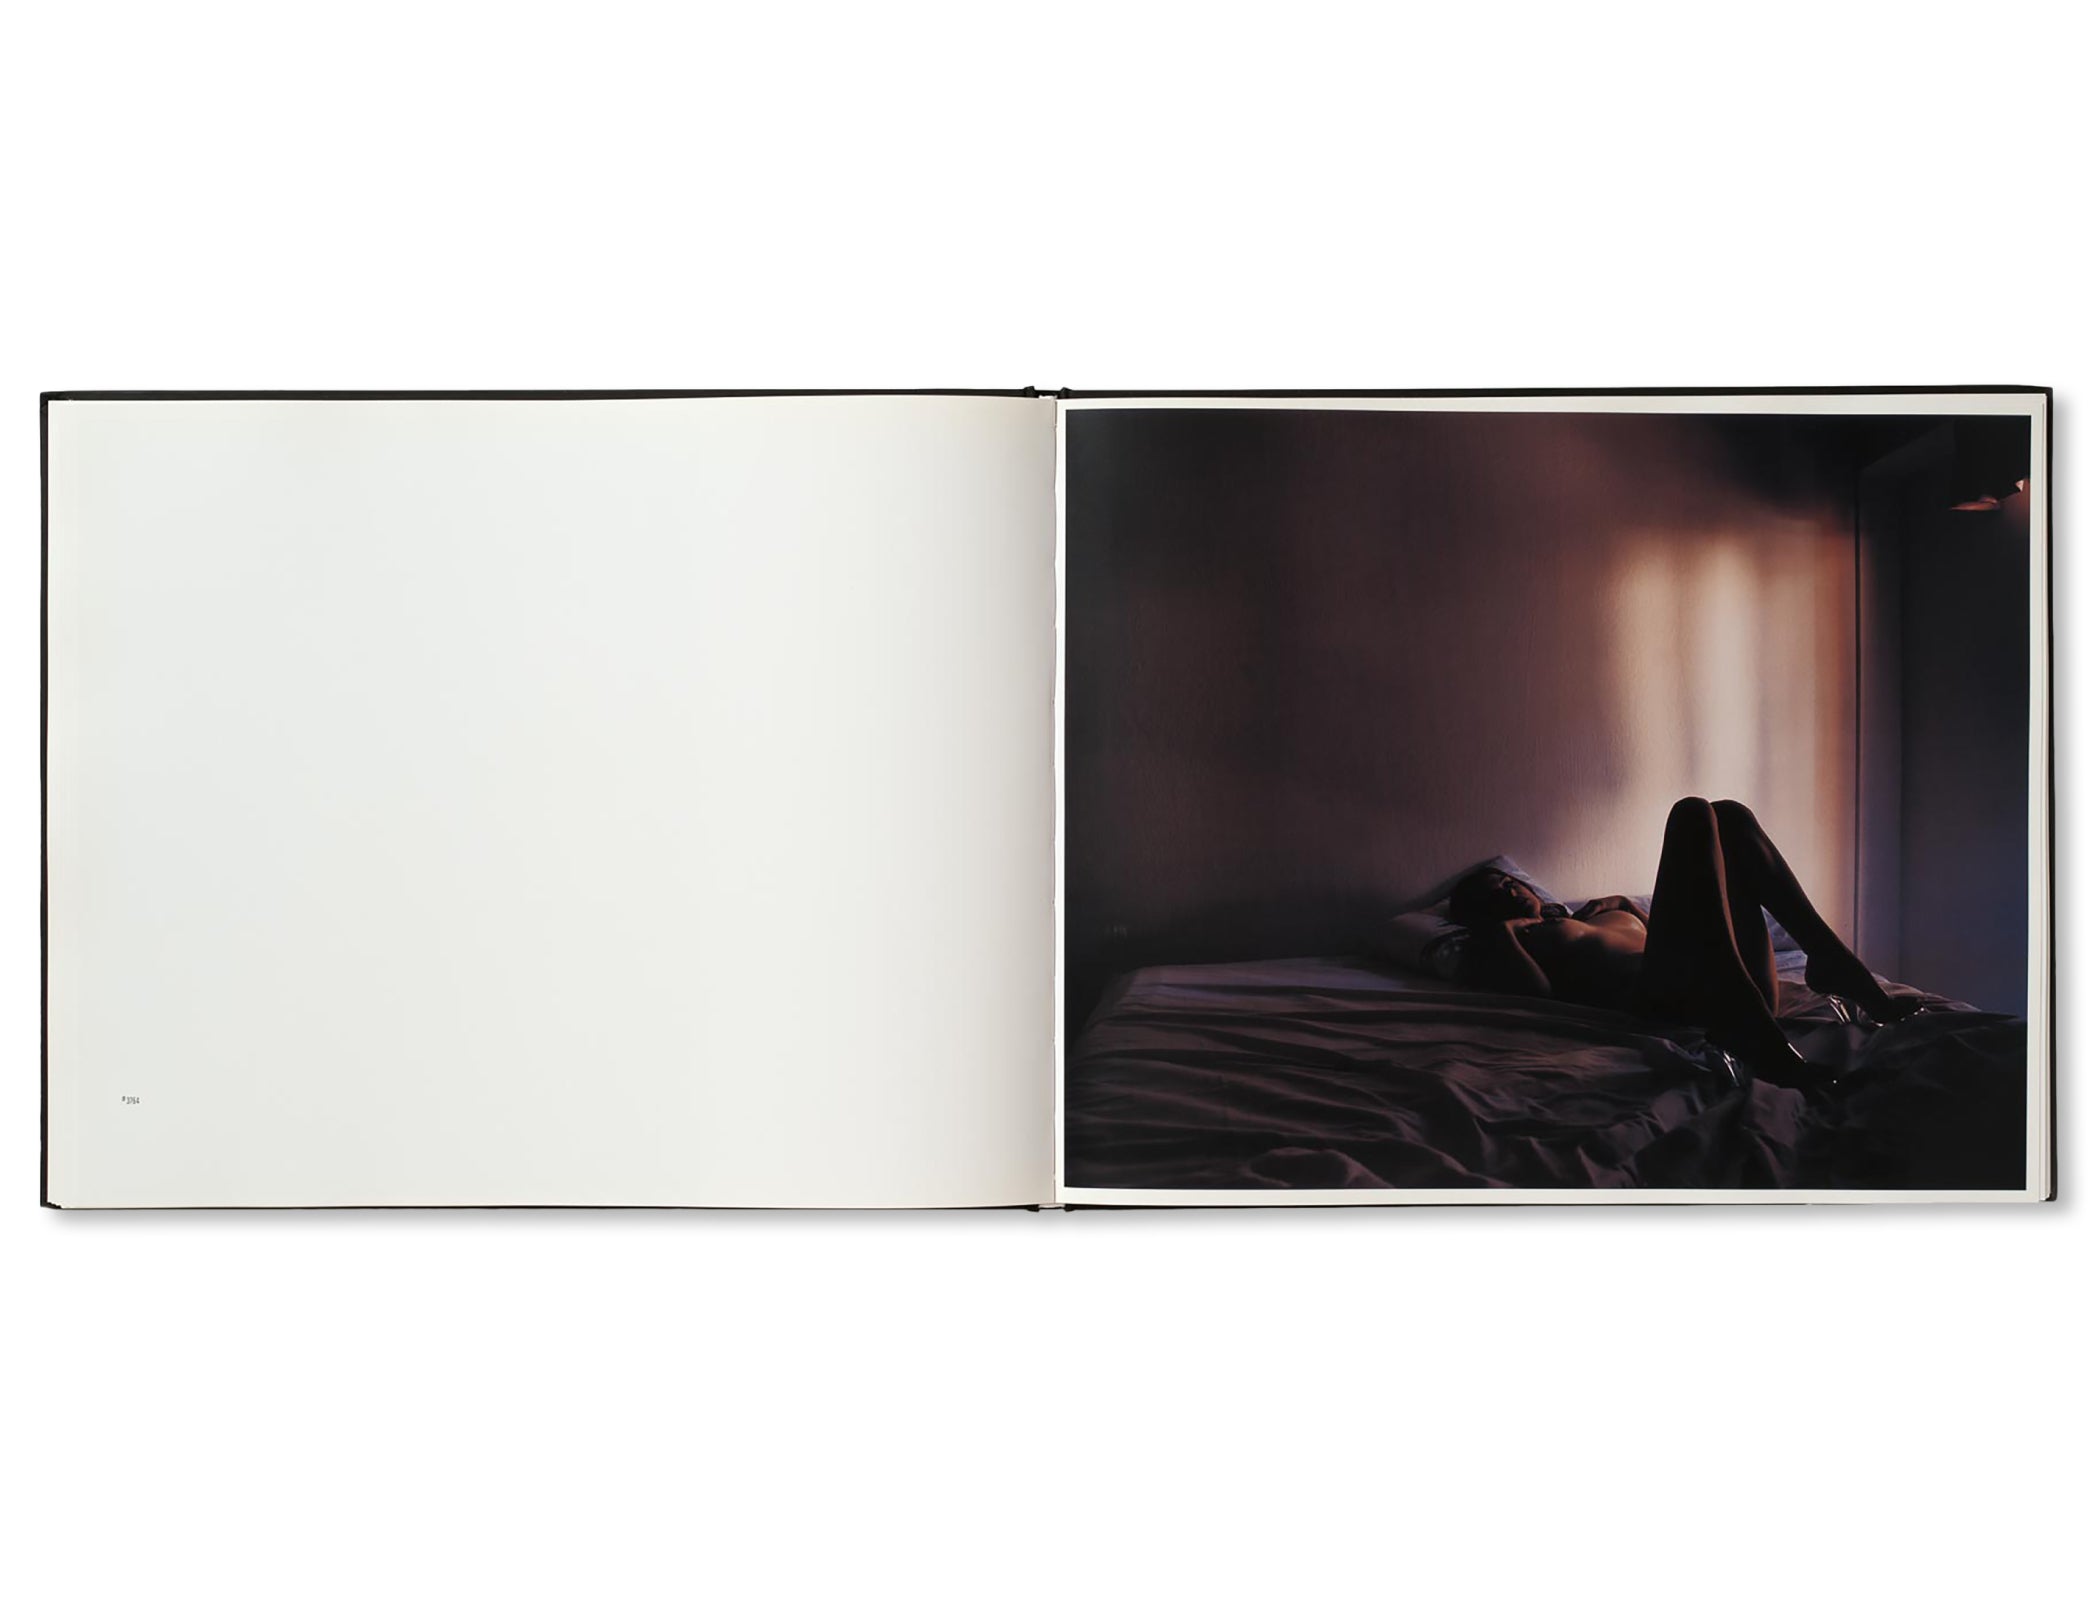 BETWEEN THE TWO by Todd Hido [SECOND EDITION]